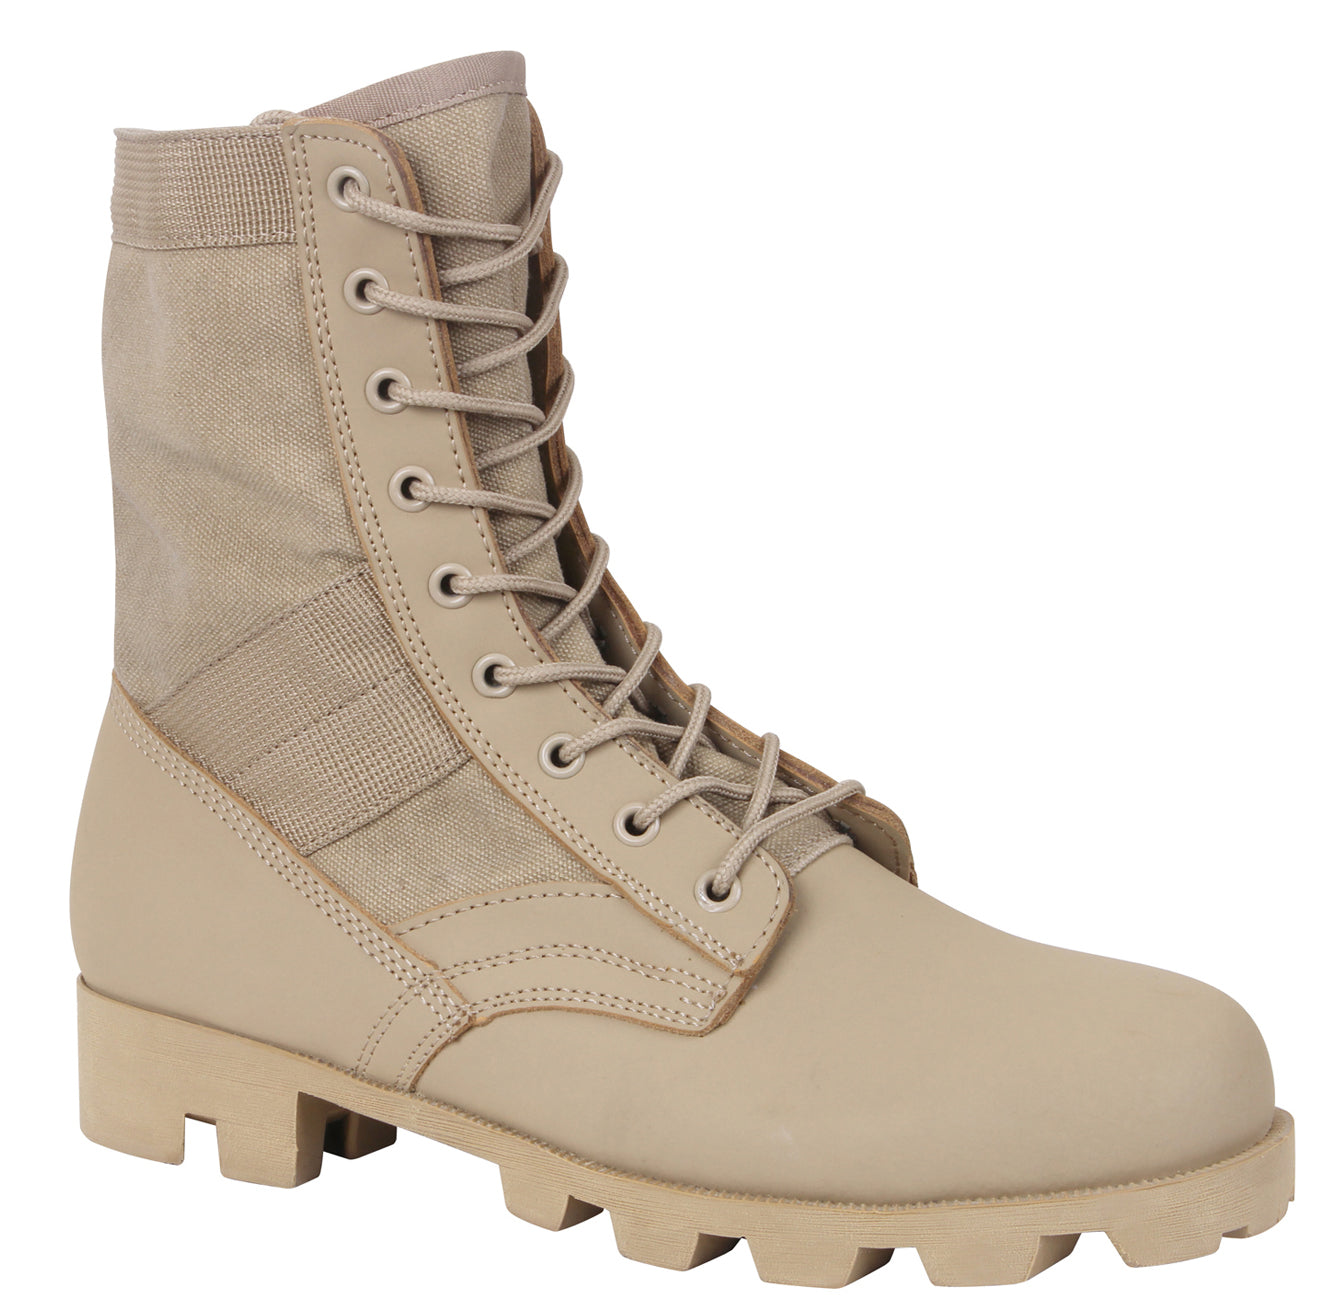 Rothco Classic Jungle Boots - Desert Tan Tactical Boot